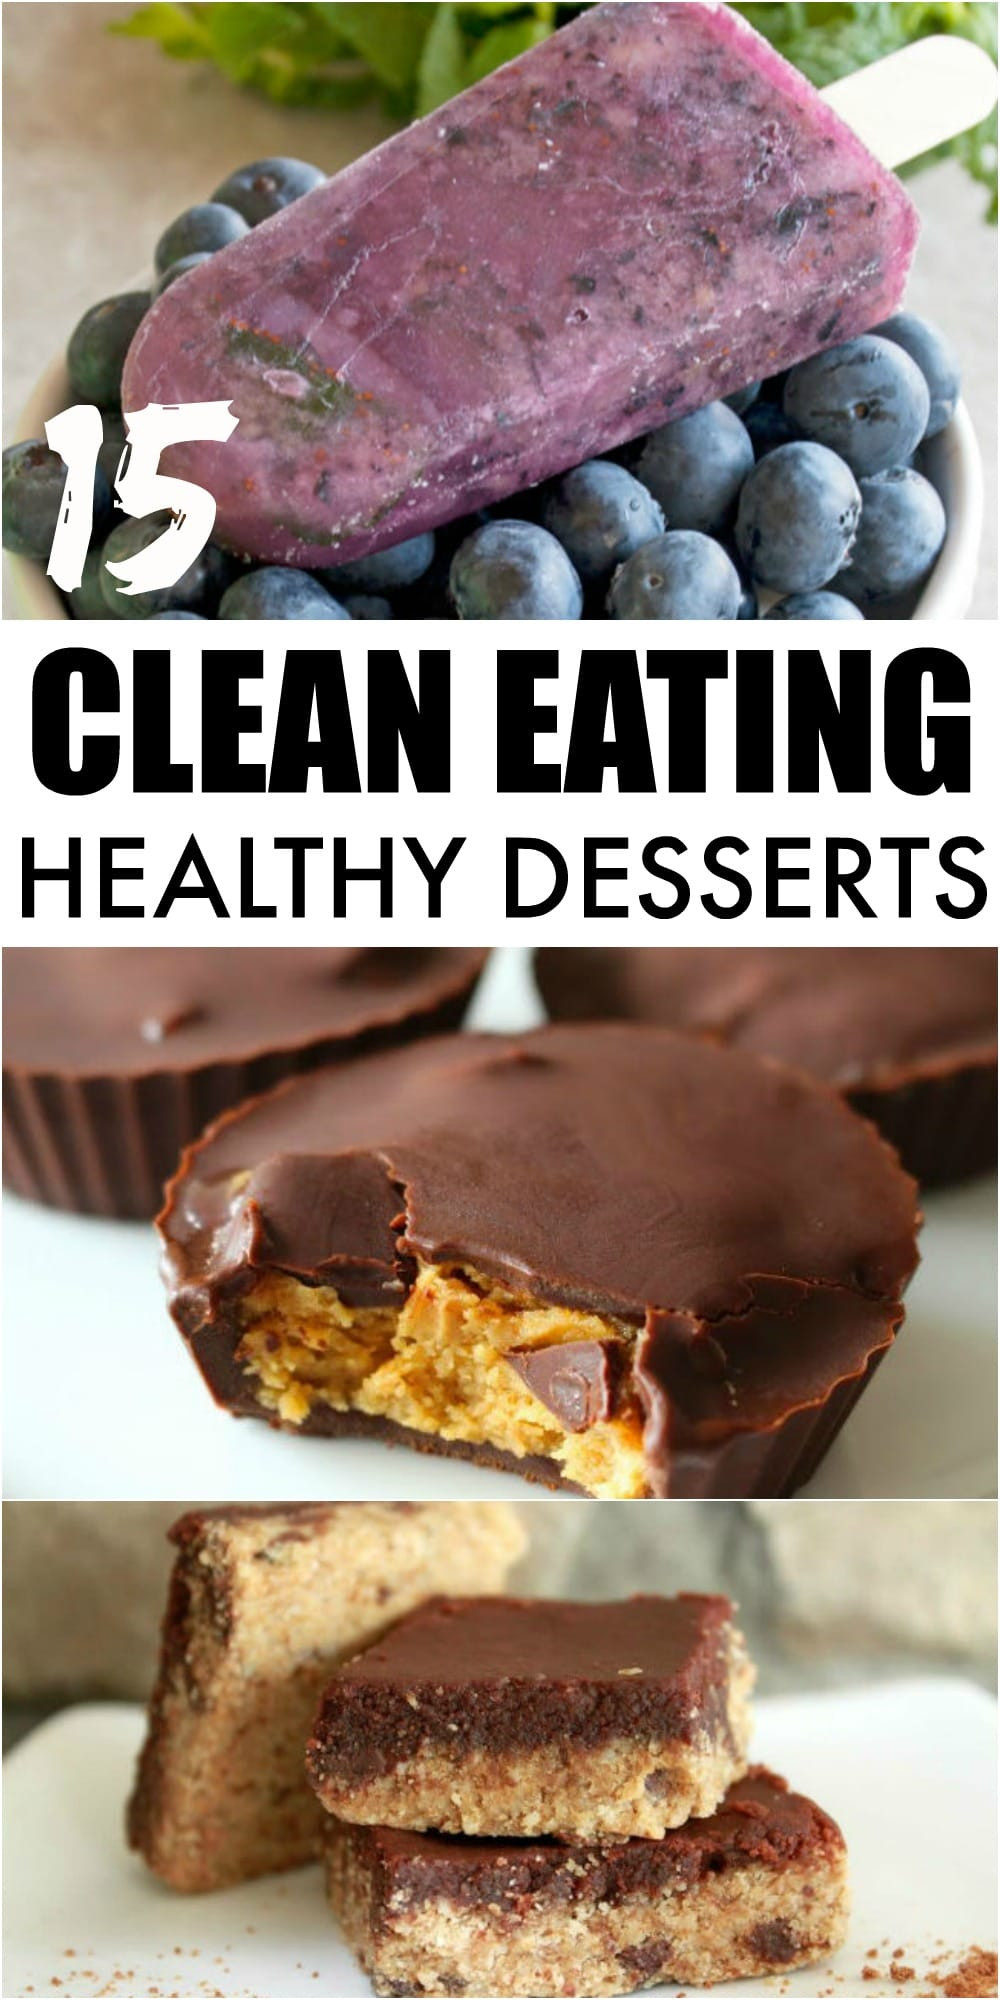 Clean Eating Desserts
 15 Clean Eating Healthy Desserts With Low or No Sugar